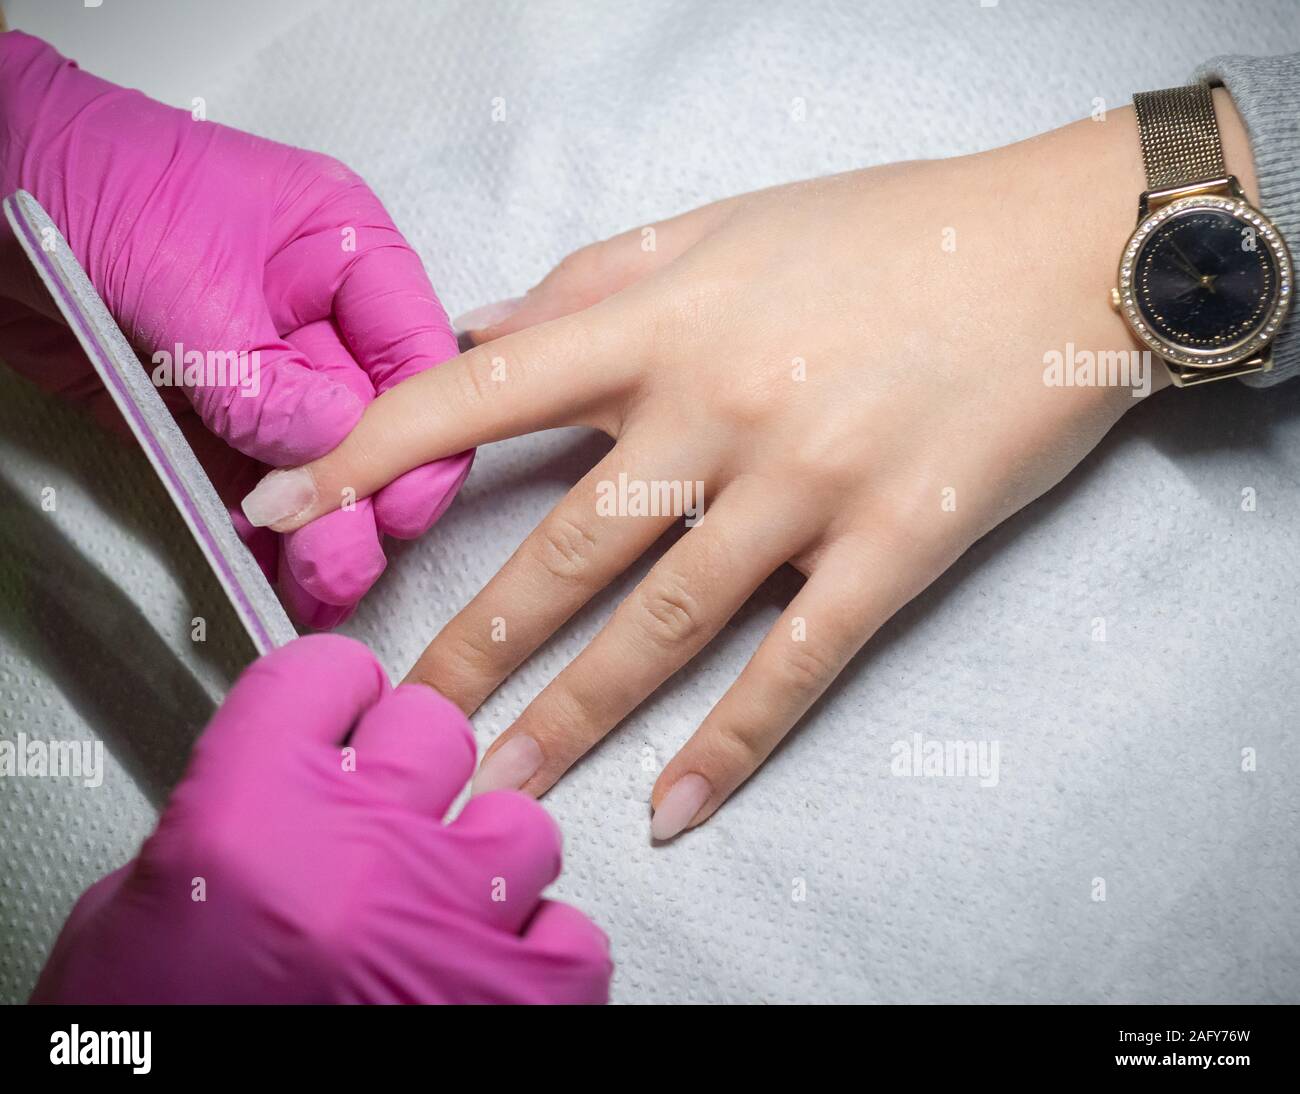 Woman getting nails filing by a professional manicurist. Stock Photo